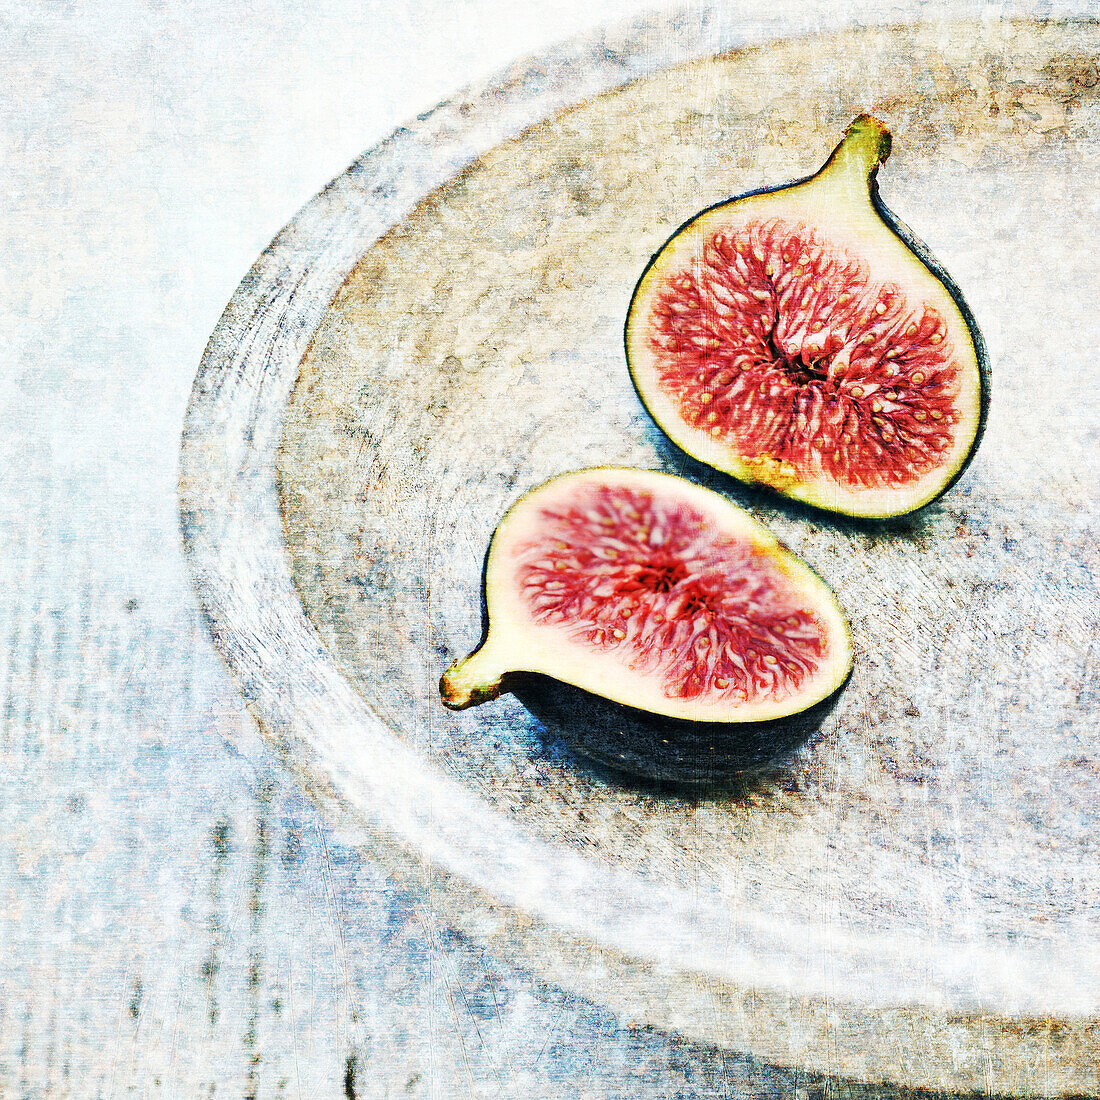 Figs on wooden plate.